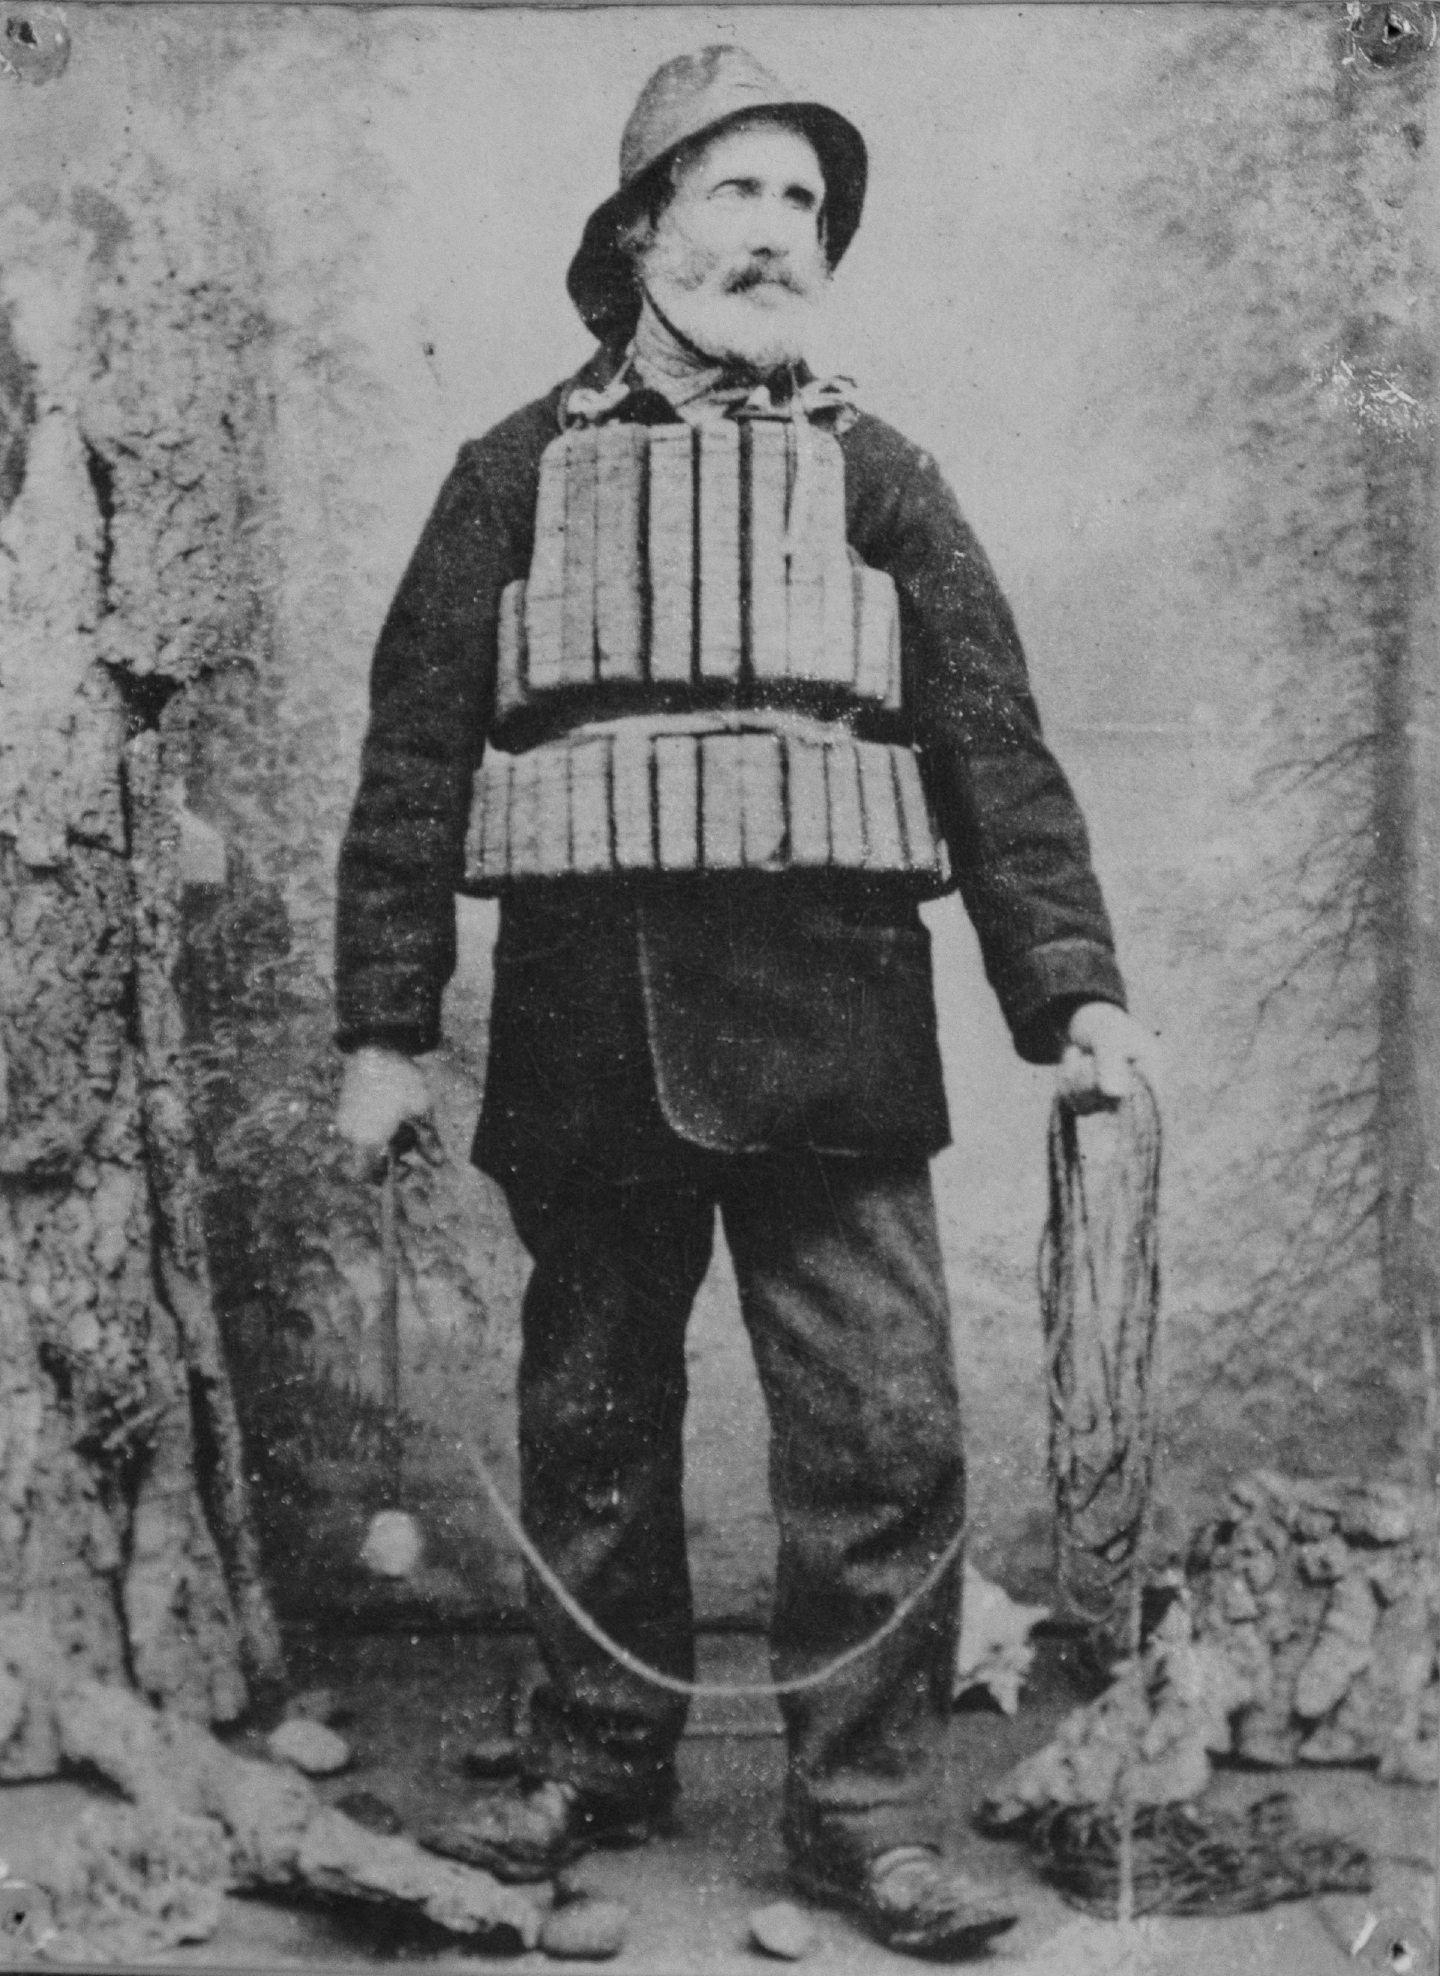 A captain from 1866 was among historical images in the Arbroath RNLI archive. Image: Paul Reid.